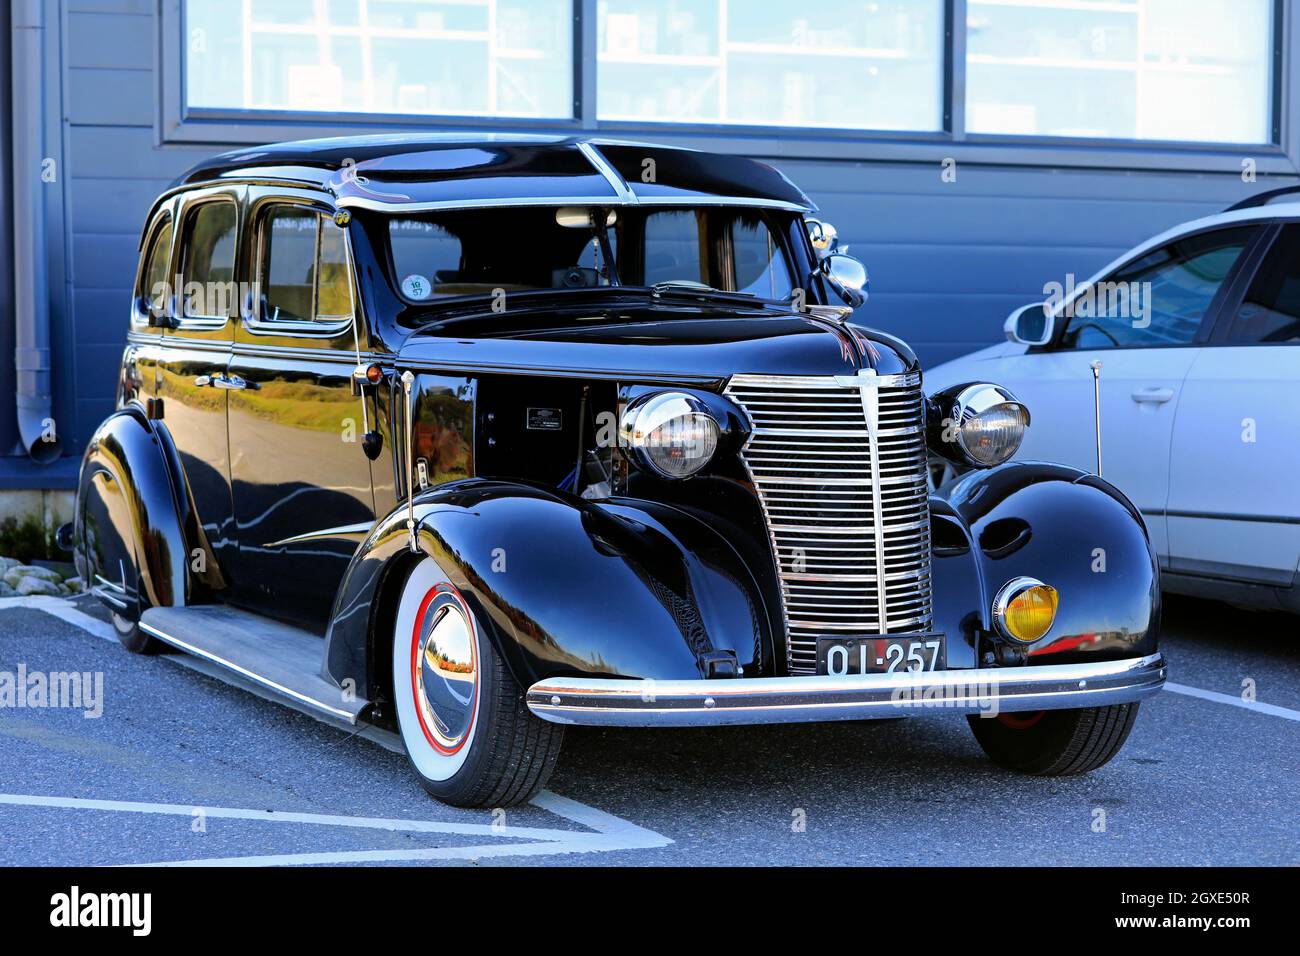 Black late 1930s American classic Chevrolet car parked on public parking lot. Salo, Finland. September 26, 2021. Stock Photo